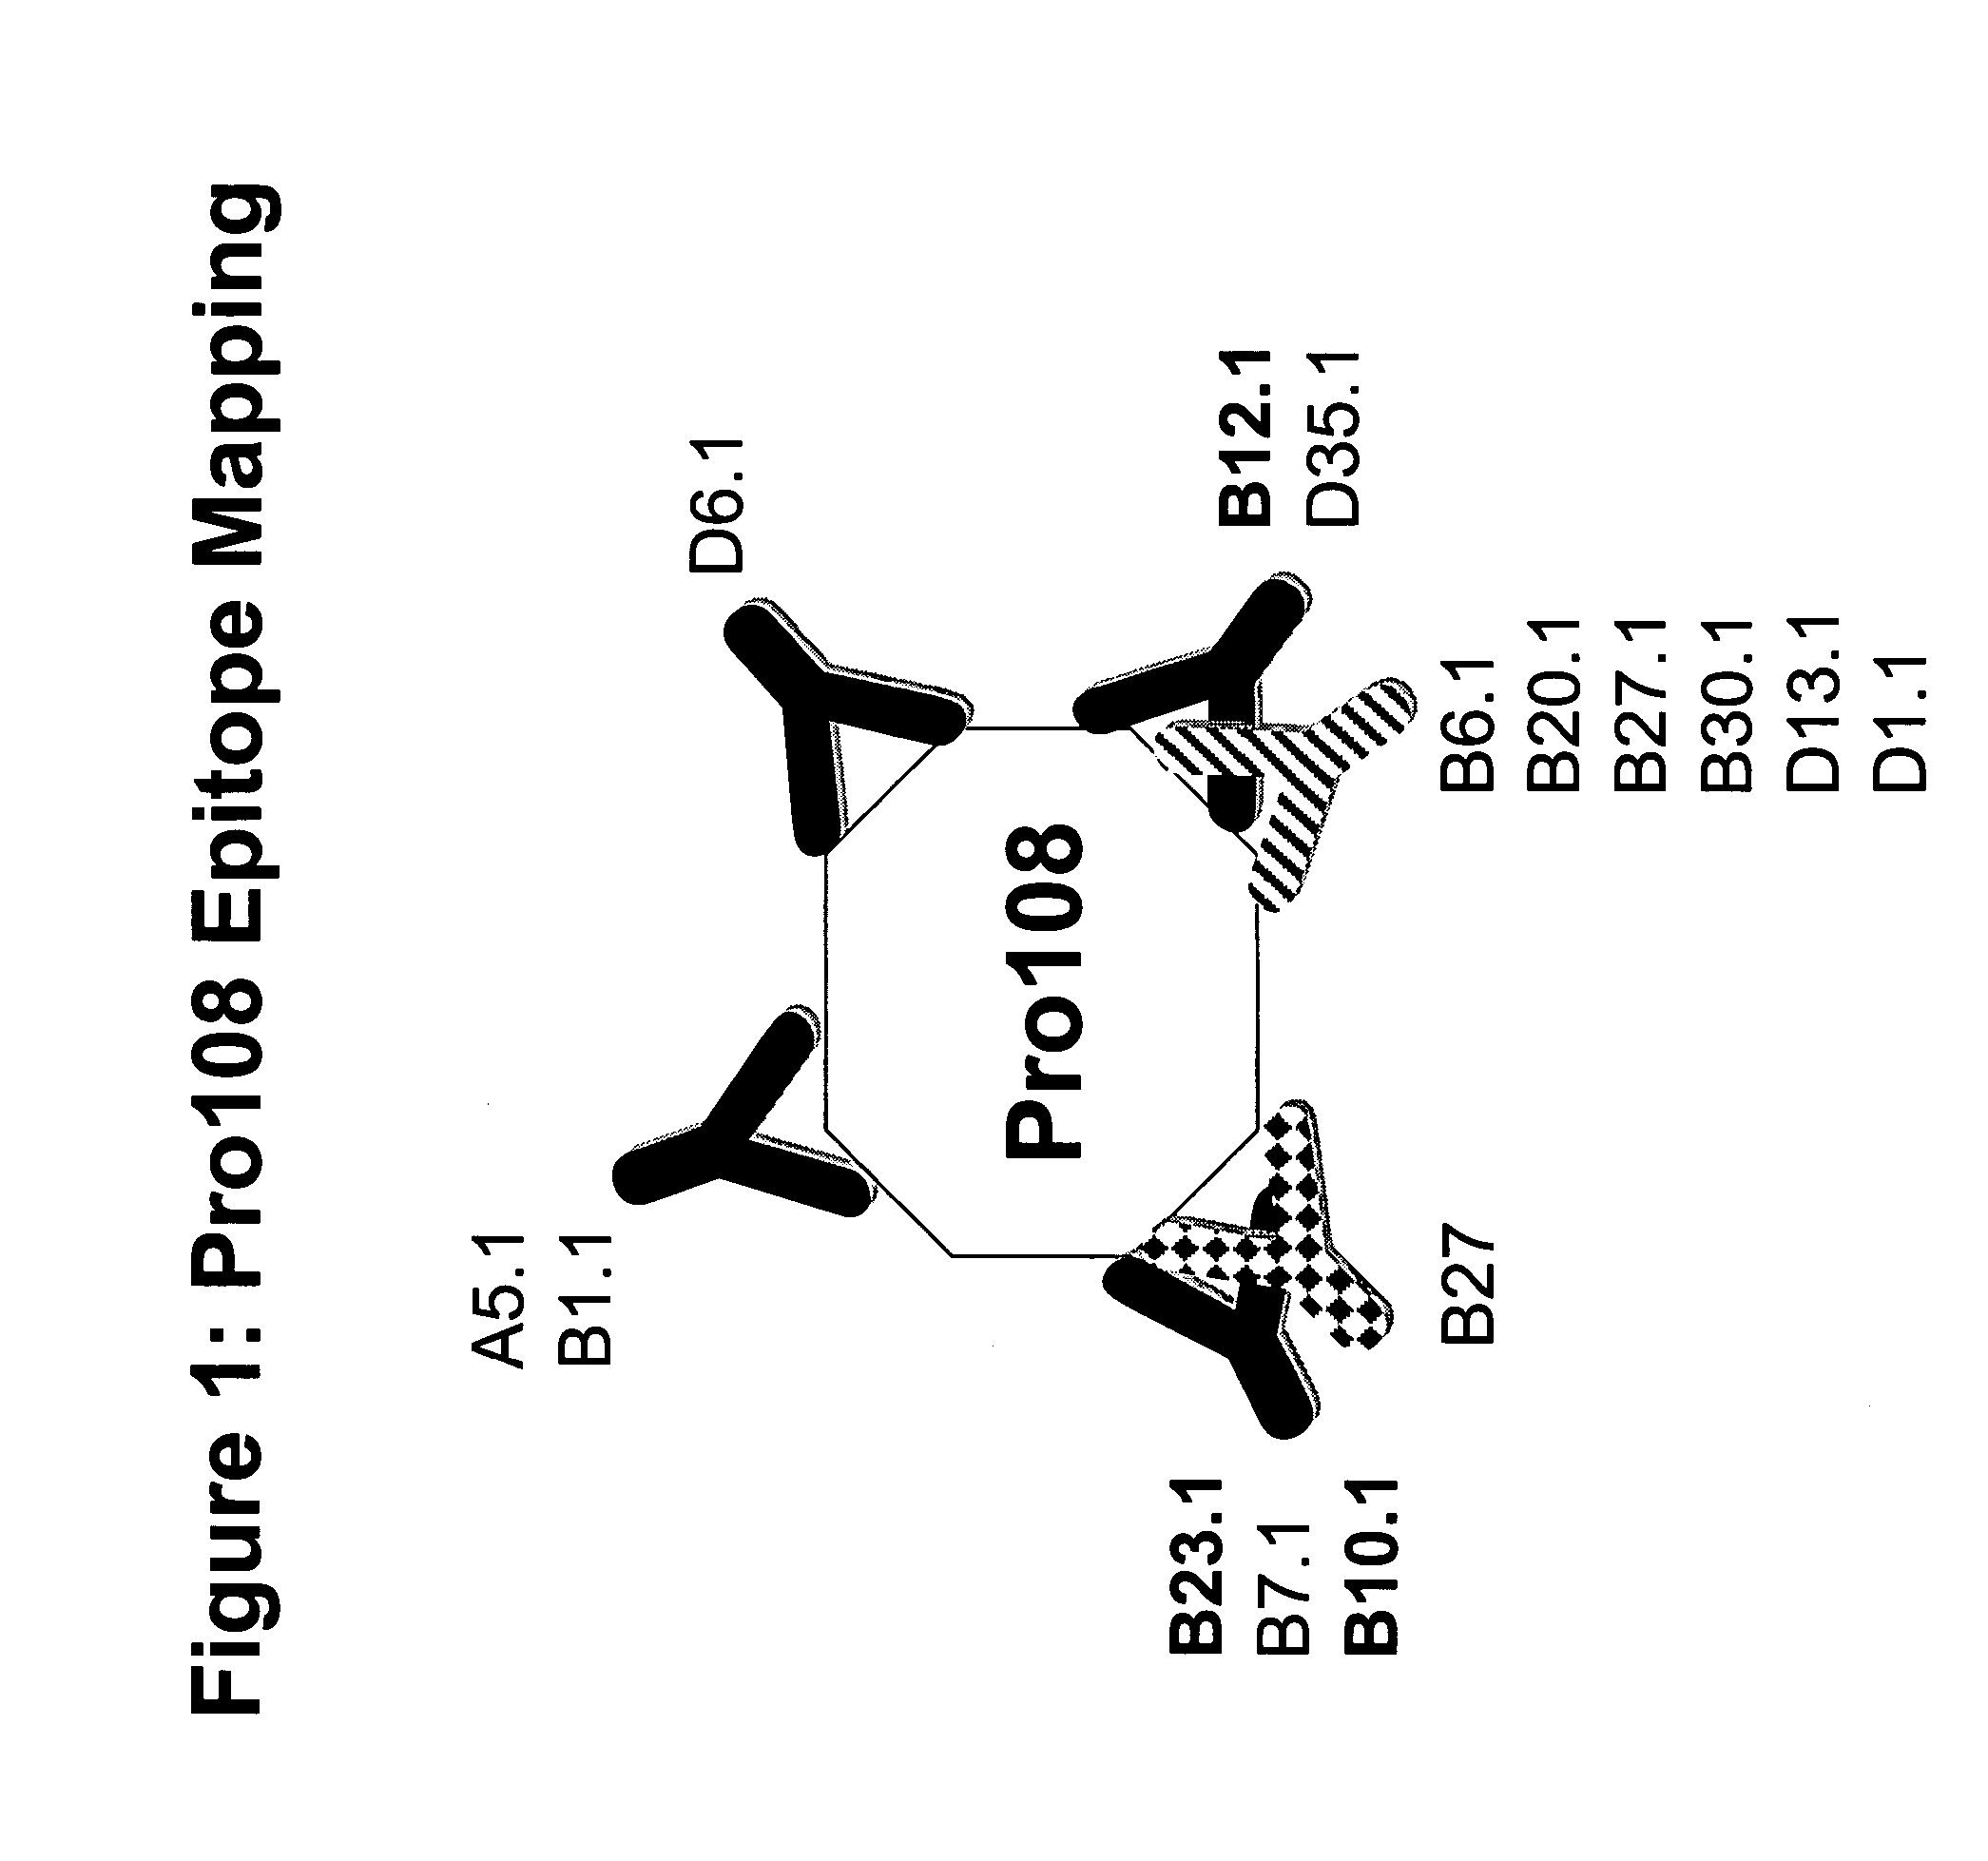 Pro108 antibody compositions and methods of use and use of Pro108 to assess cancer risk